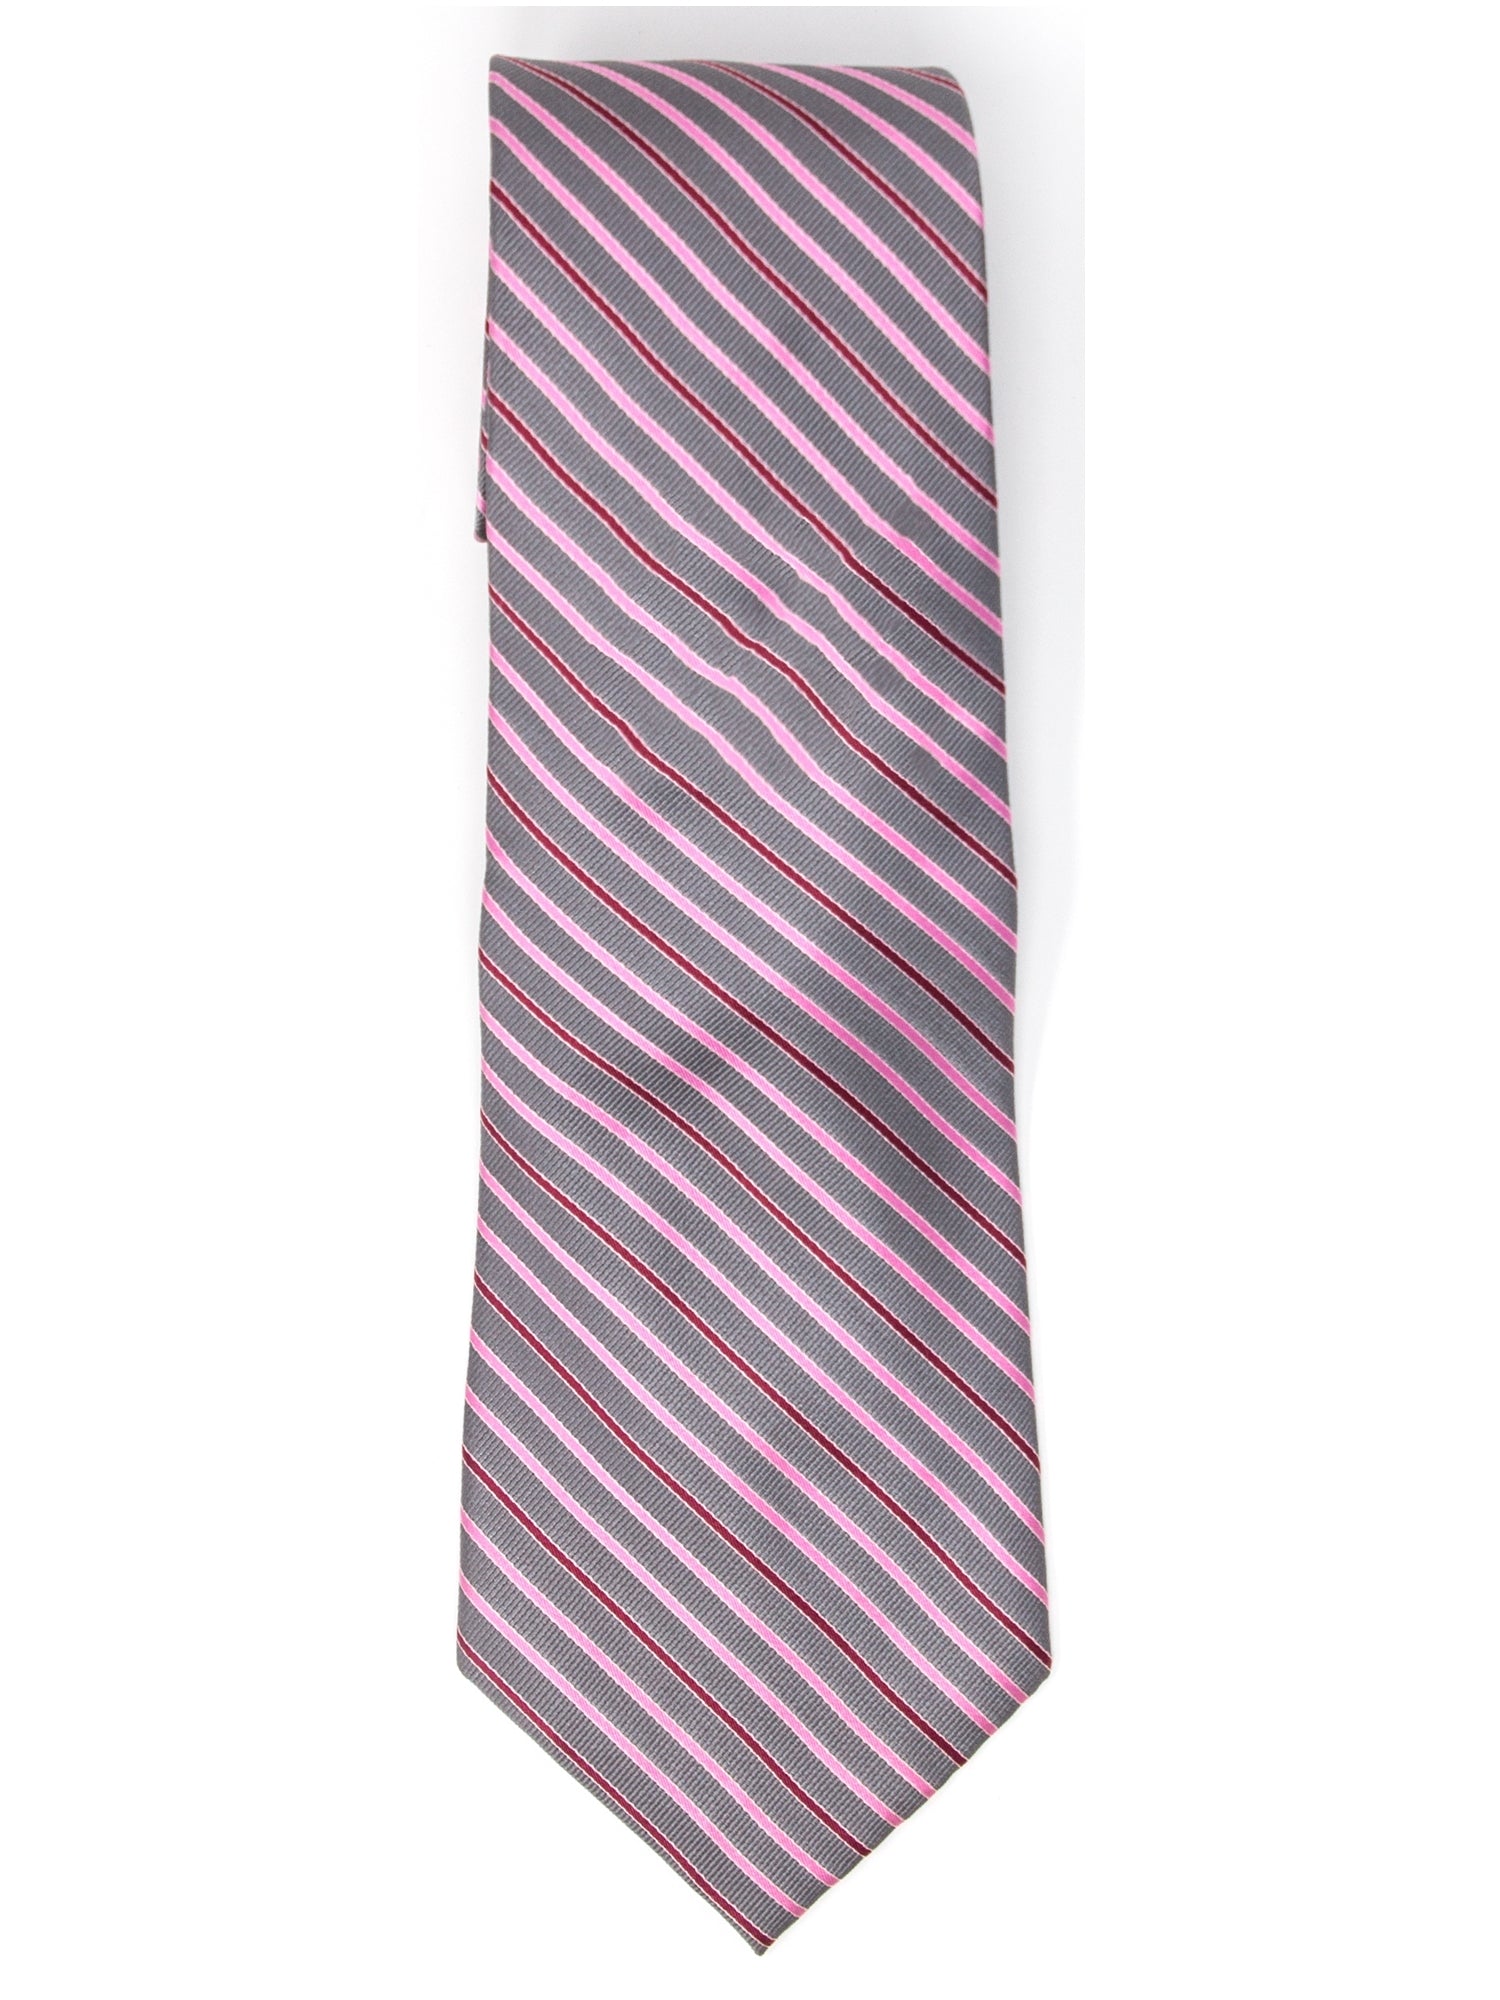 Men's Silk Woven Wedding Neck Tie Collection Neck Tie TheDapperTie Grey, Pink And Red Stripes Regular 